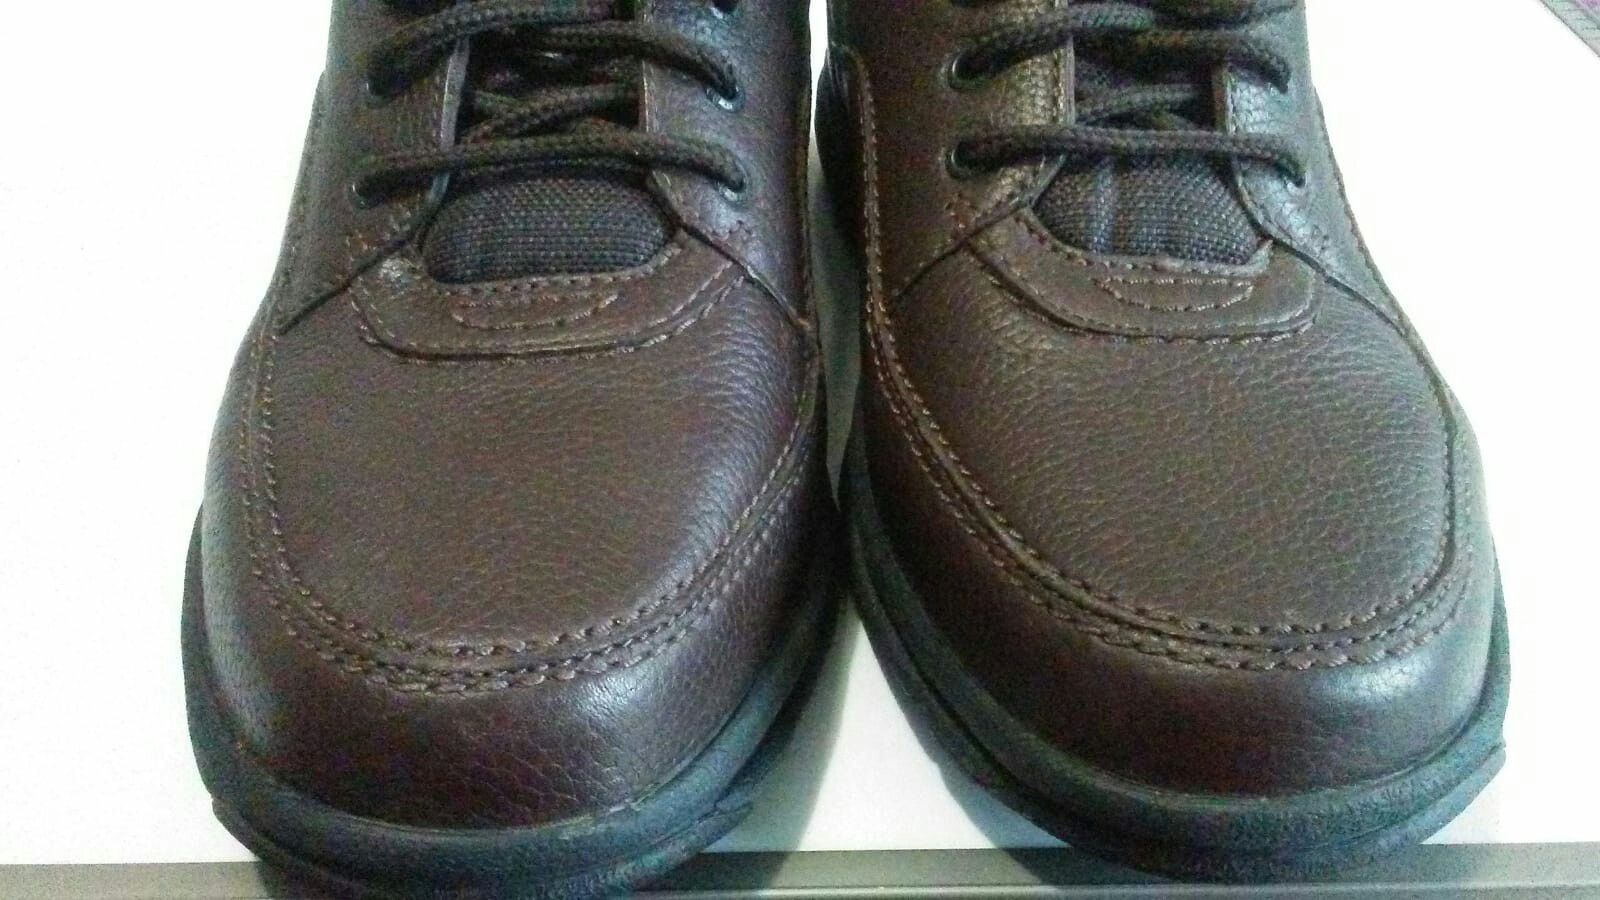 11.5 Rockport Classic Men's Brown Leather Oxfords Walking Shoes